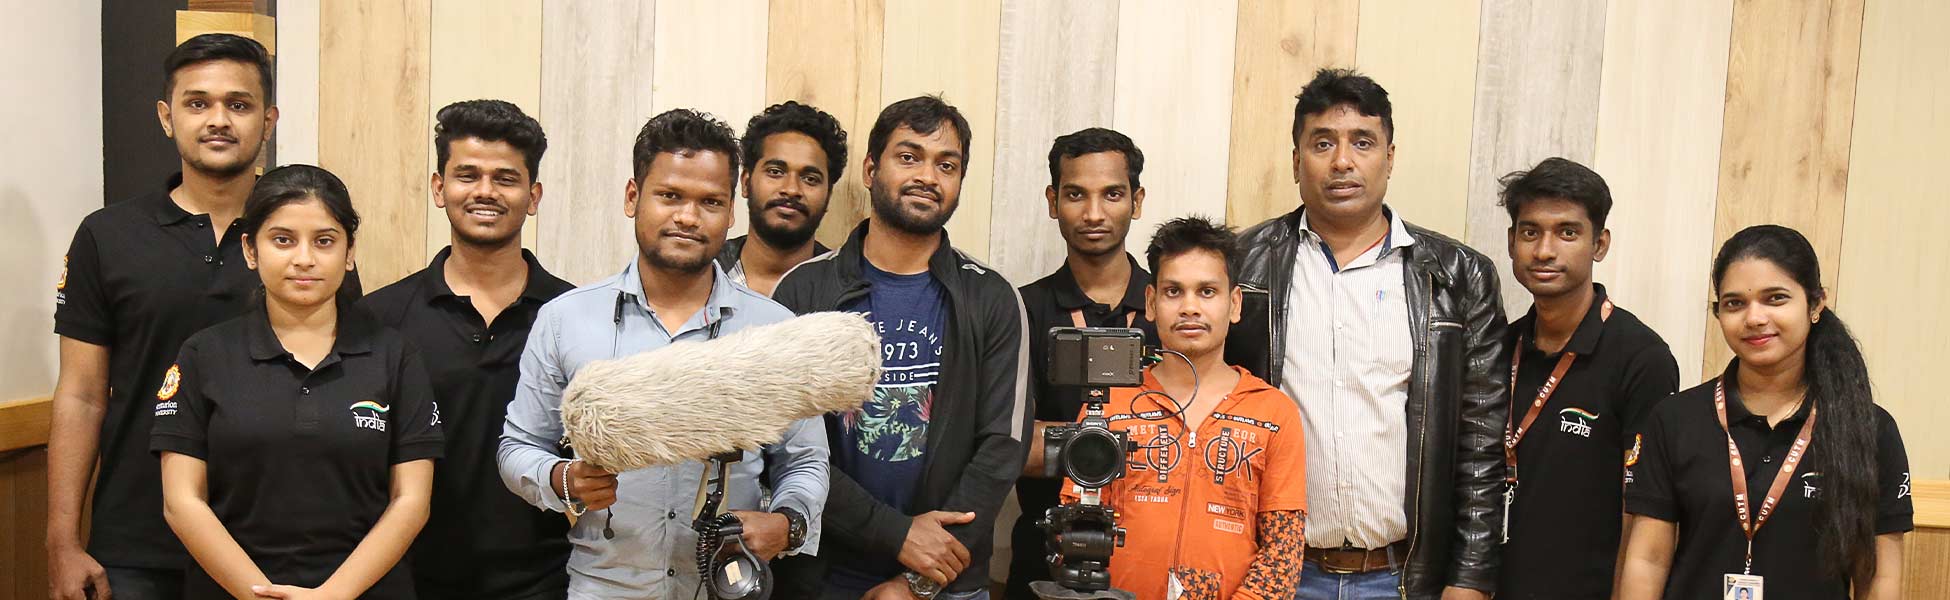 film production services in Korba, video production services in Korba, tv production services in Korba, production services in Korba